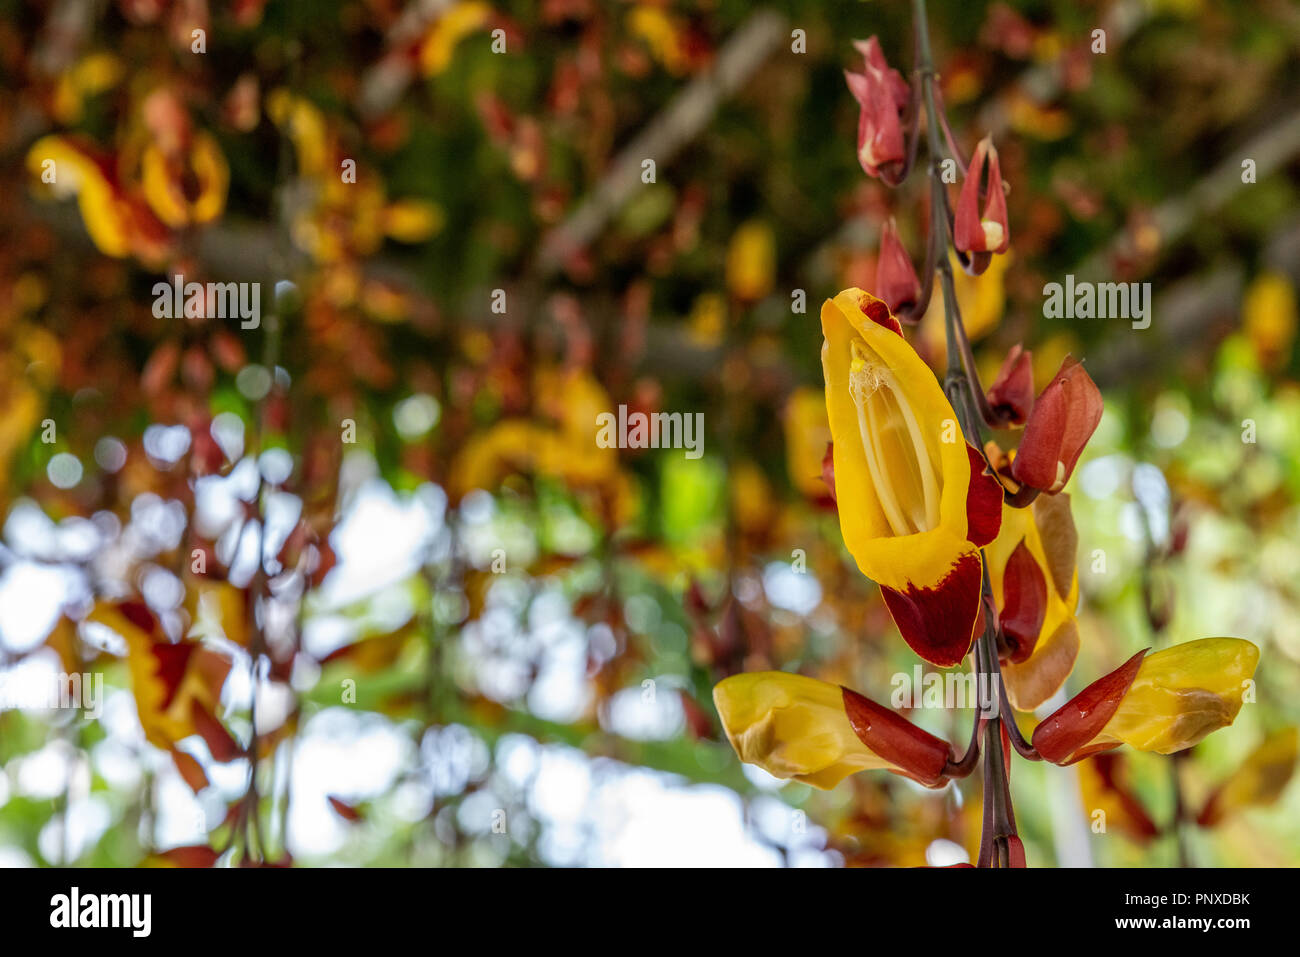 Yellow colorOrchidaceae hanging in the air Stock Photo